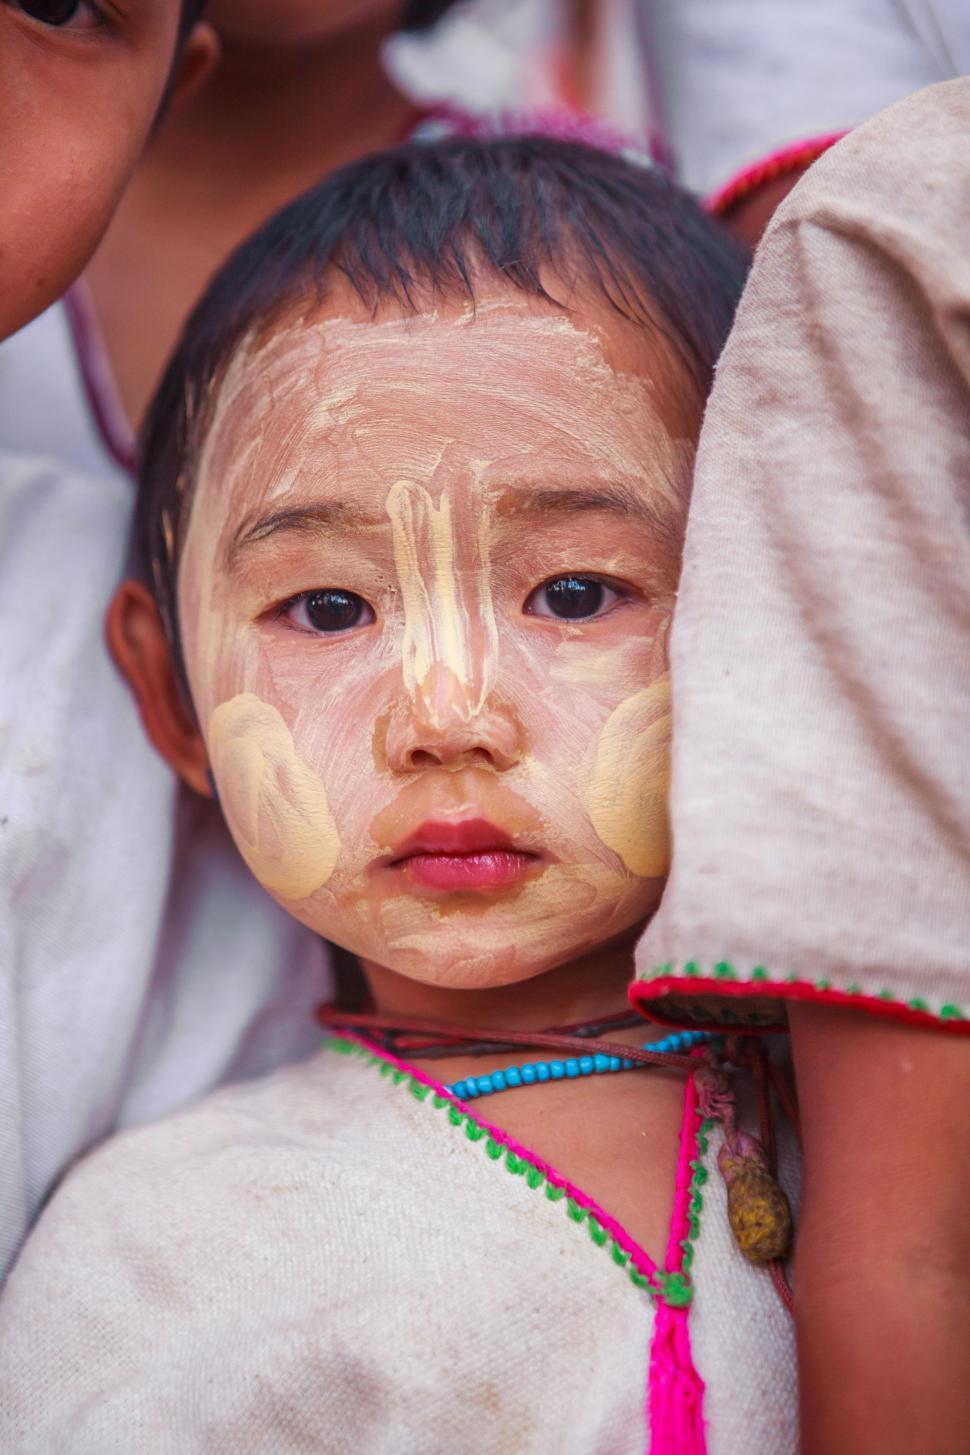 Free Image of Young Child With Face Painted as Woman 